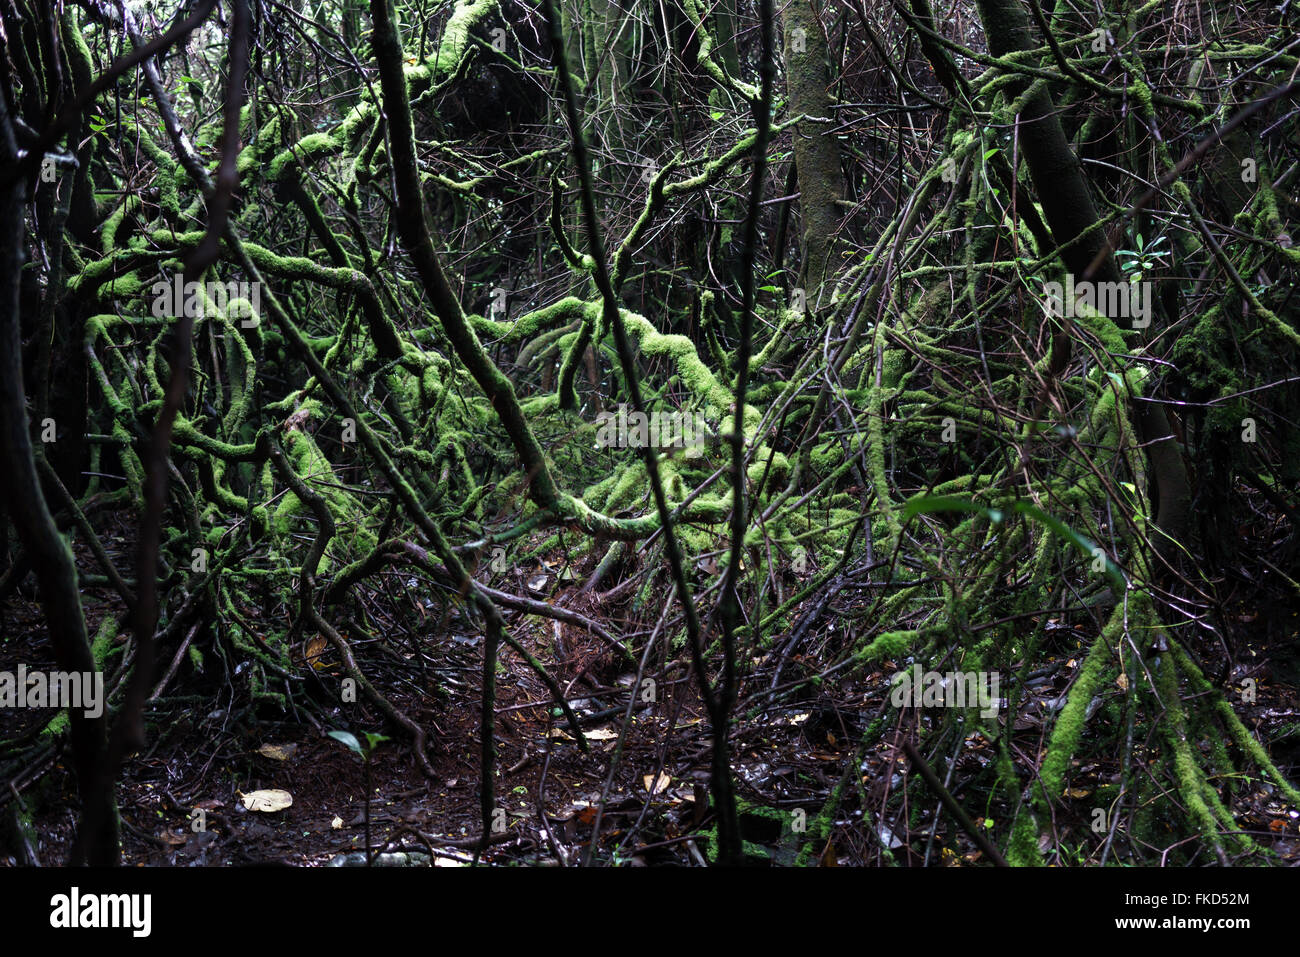 Moss covered tree branches in dense forest, Costa Rica Stock Photo